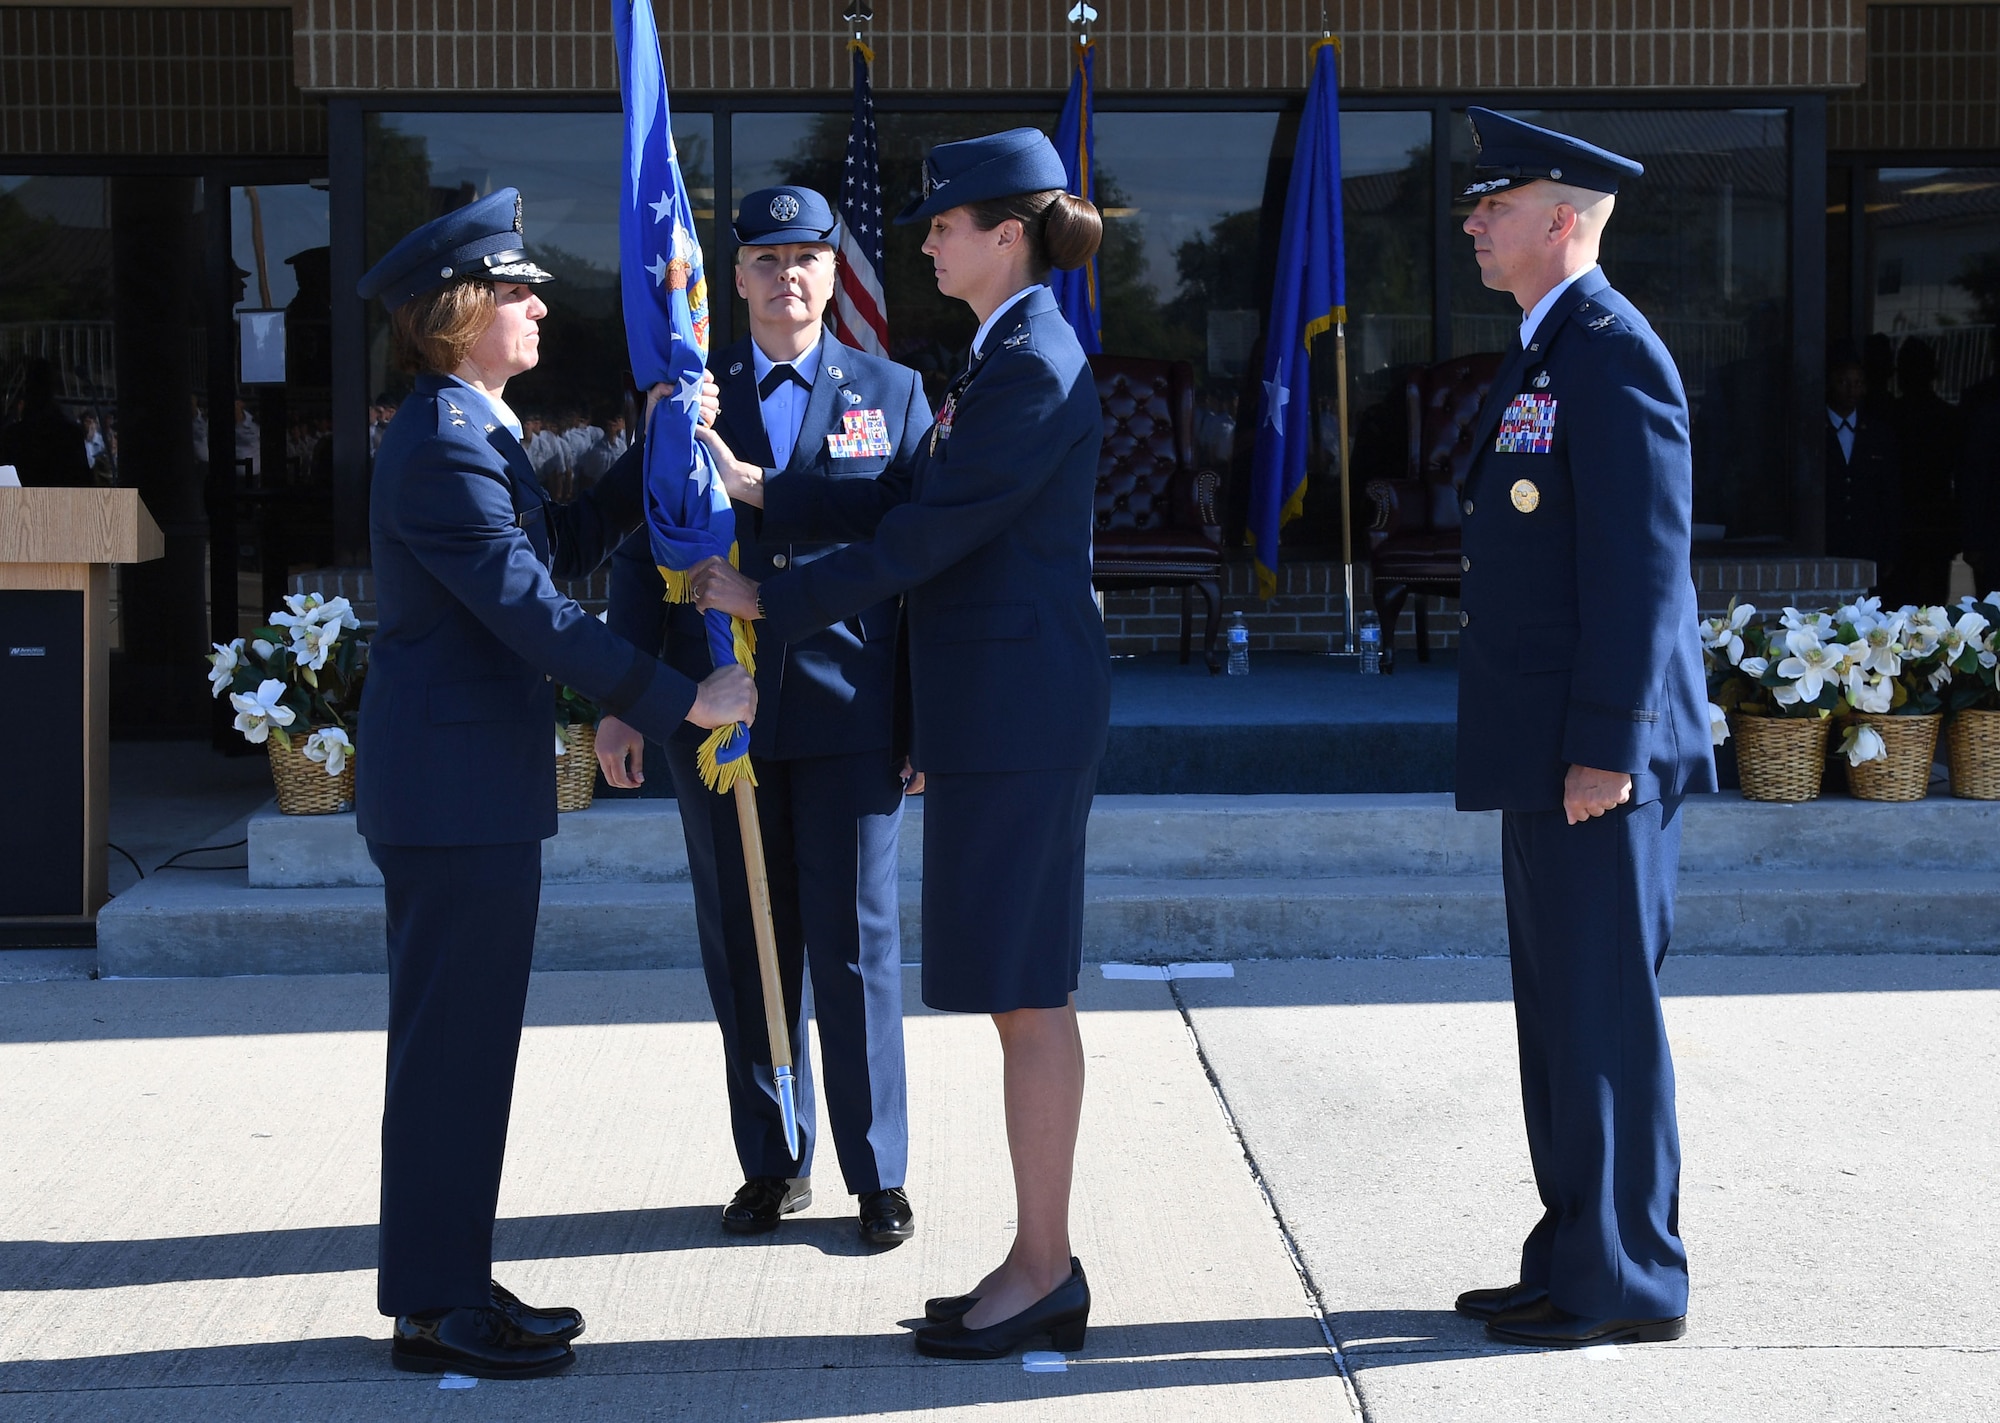 U.S. Air Force Maj. Gen. Andrea Tullos, Second Air Force commander, takes the guidon from Col. Heather Blackwell, outgoing 81st Training Wing commander, during the change of command ceremony on the Levitow Training Support Facility drill pad at Keesler Air Force Base, Mississippi, June 17, 2021. Blackwell is now assigned to the Air Combat Command. (U.S. Air Force photo by Kemberly Groue)